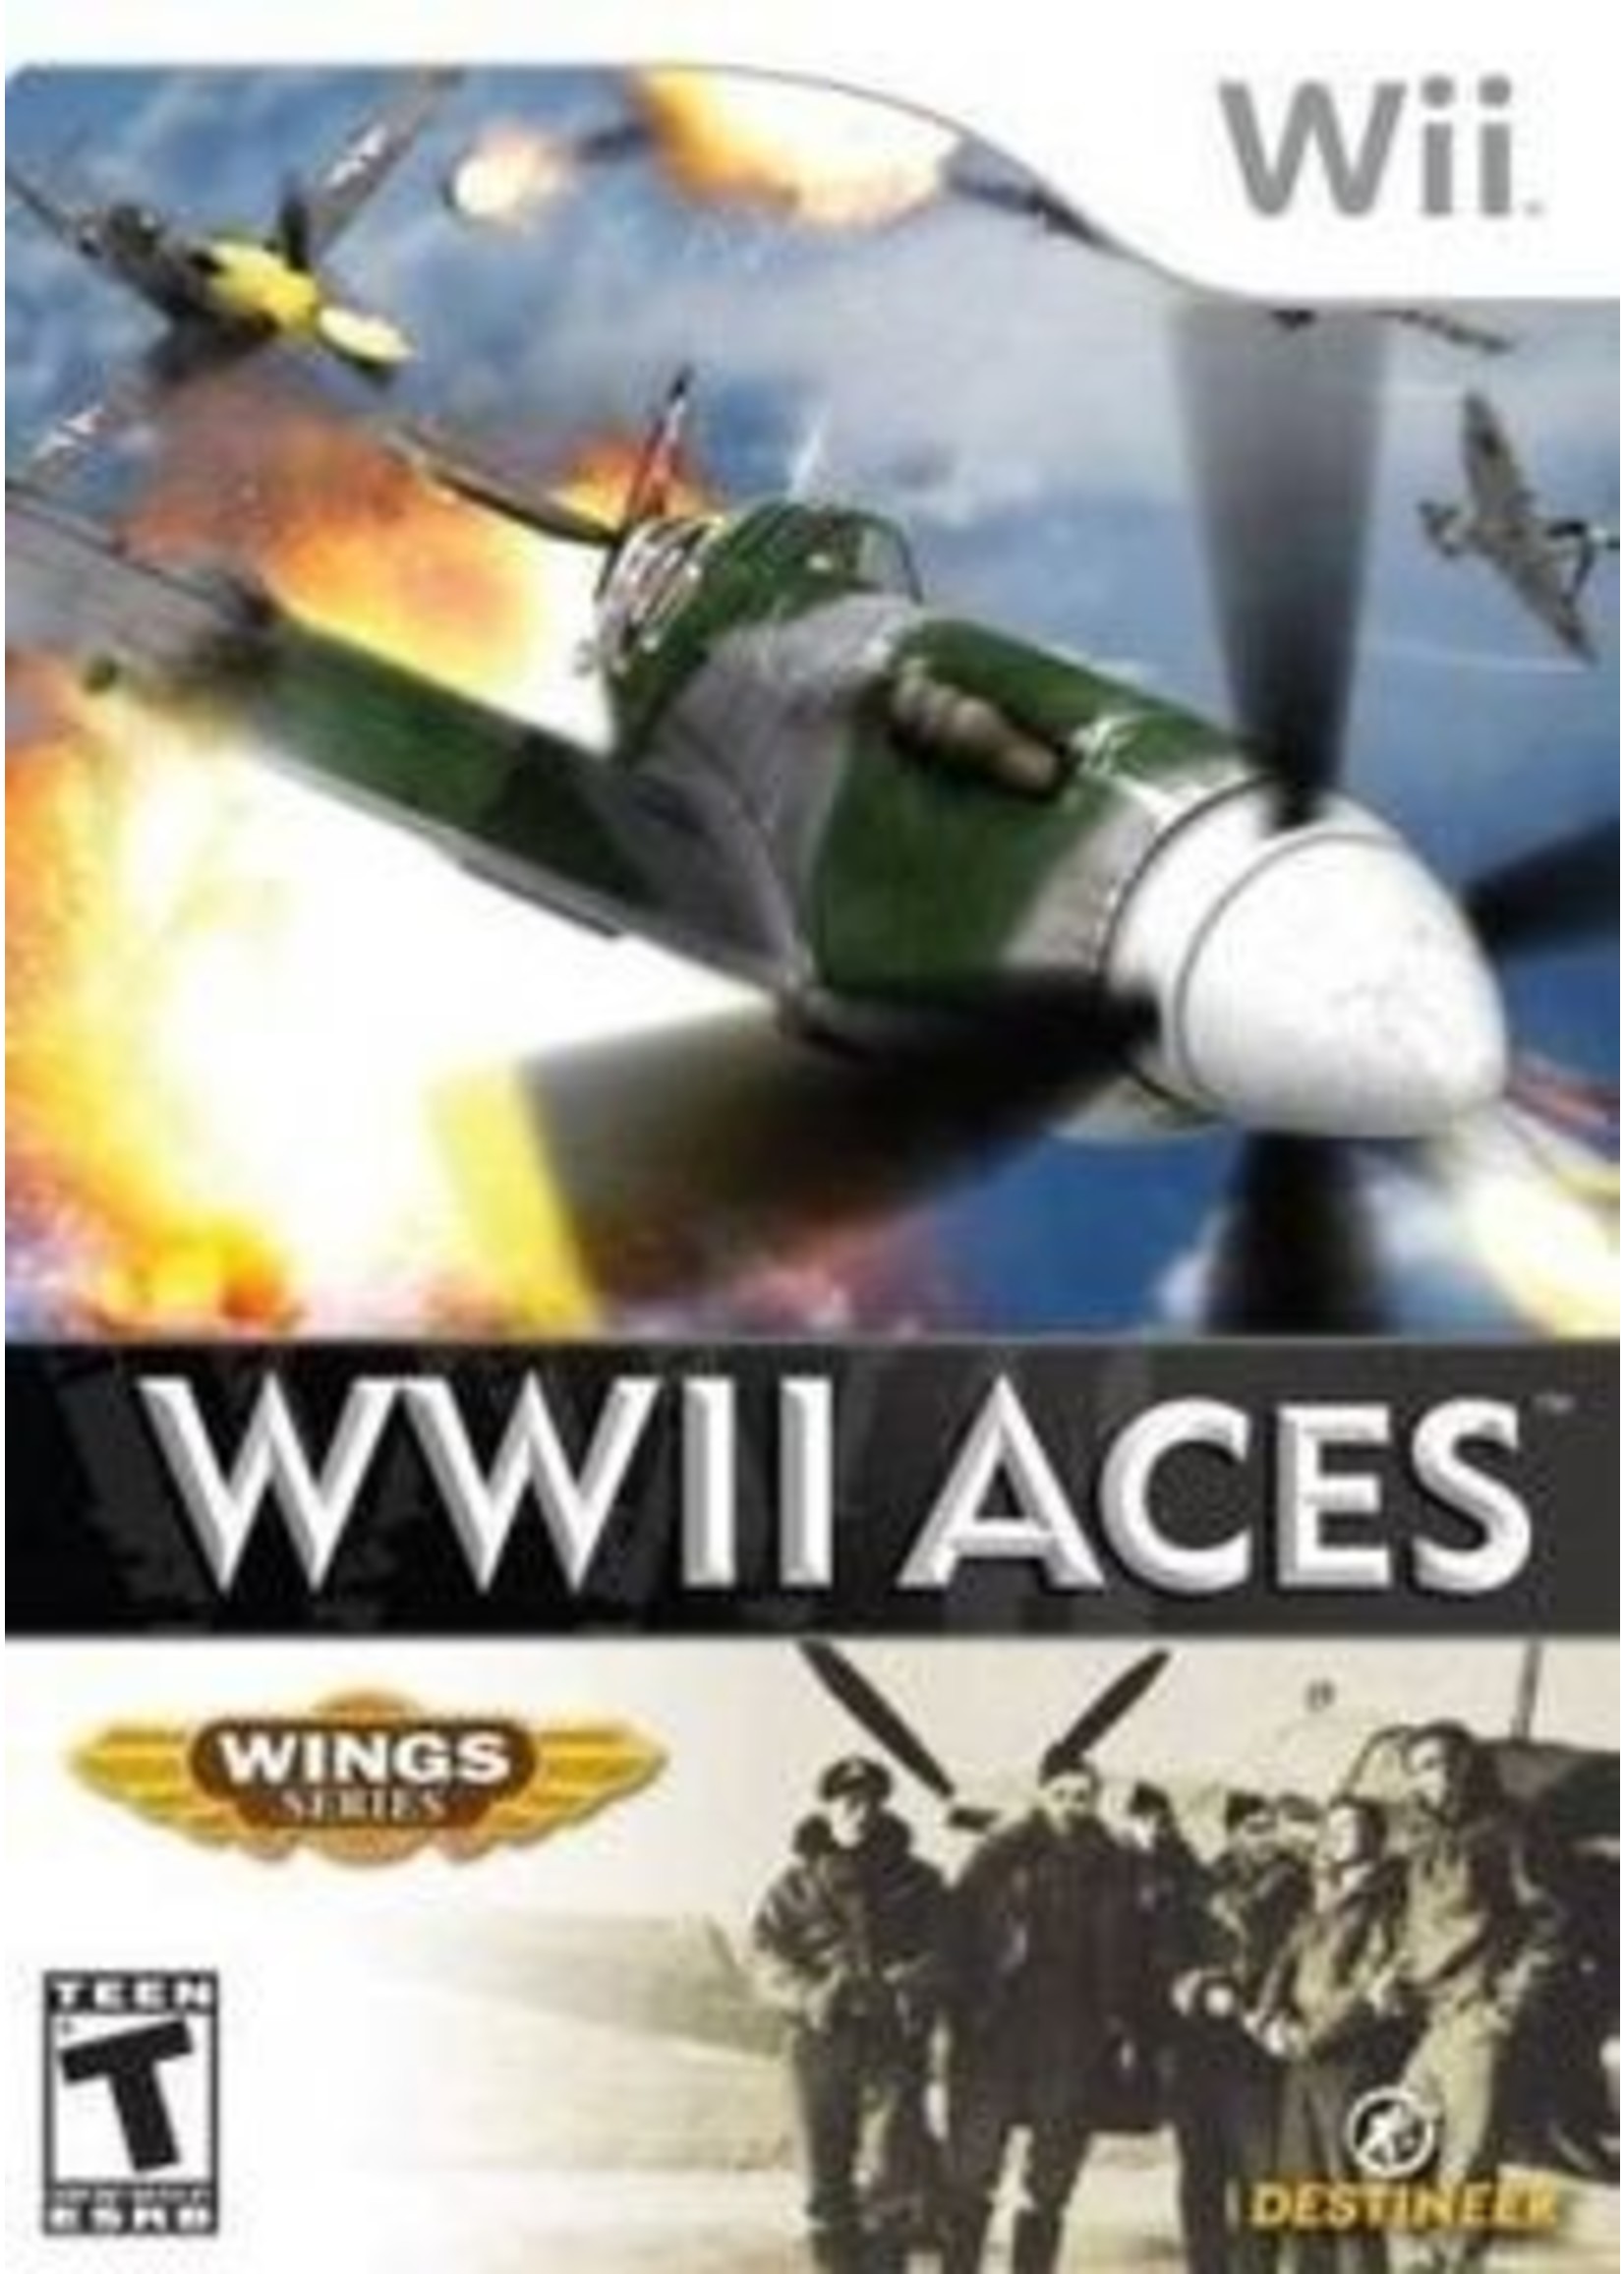 Nintendo Wii WWII Aces